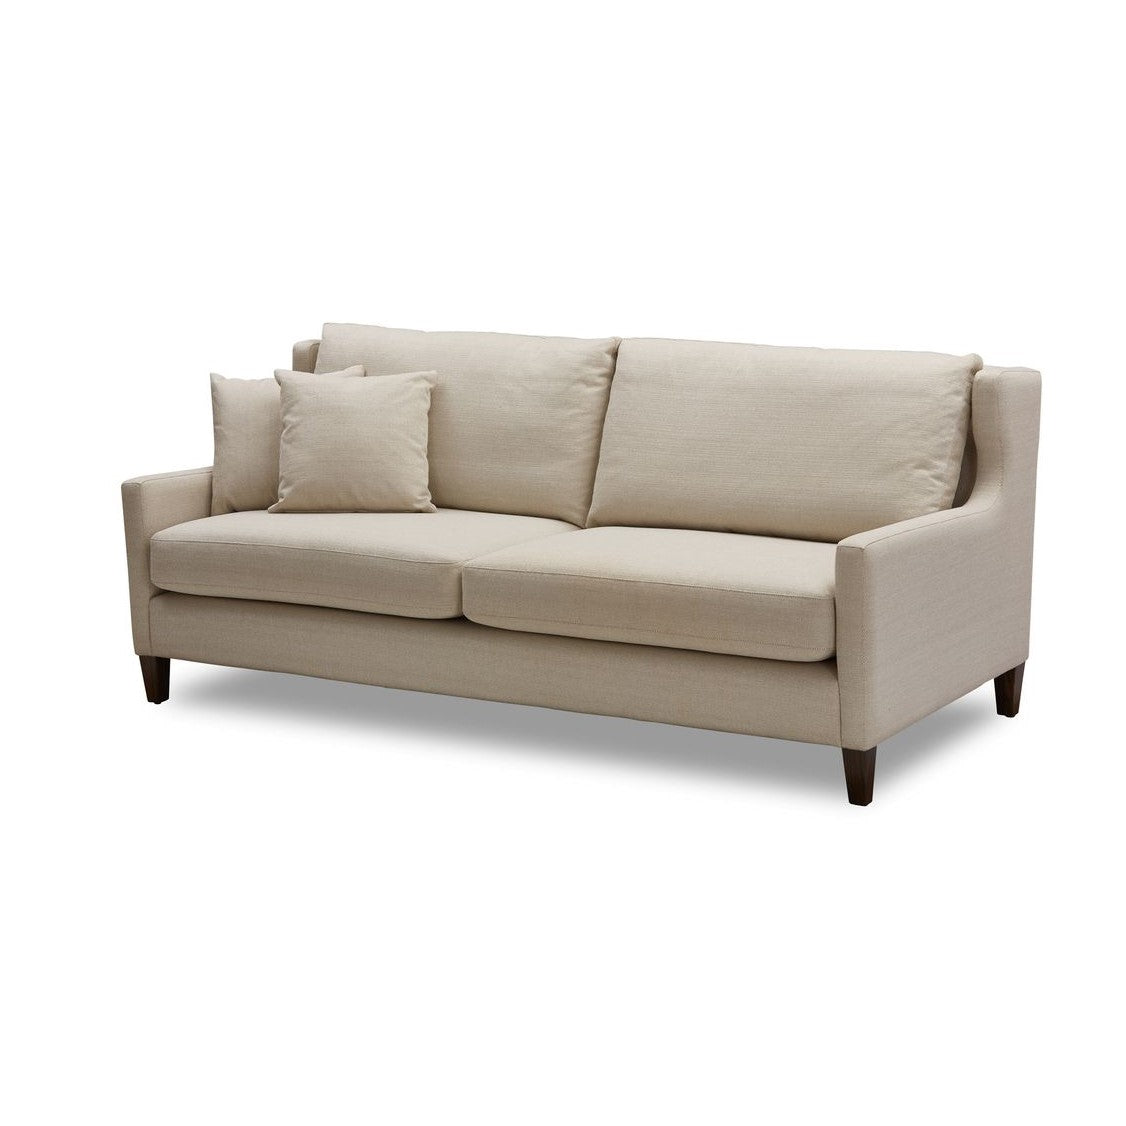 Bridgewater Sofa by Molmic available from Make Your House A Home, Furniture Store located in Bendigo, Victoria. Australian Made in Melbourne.